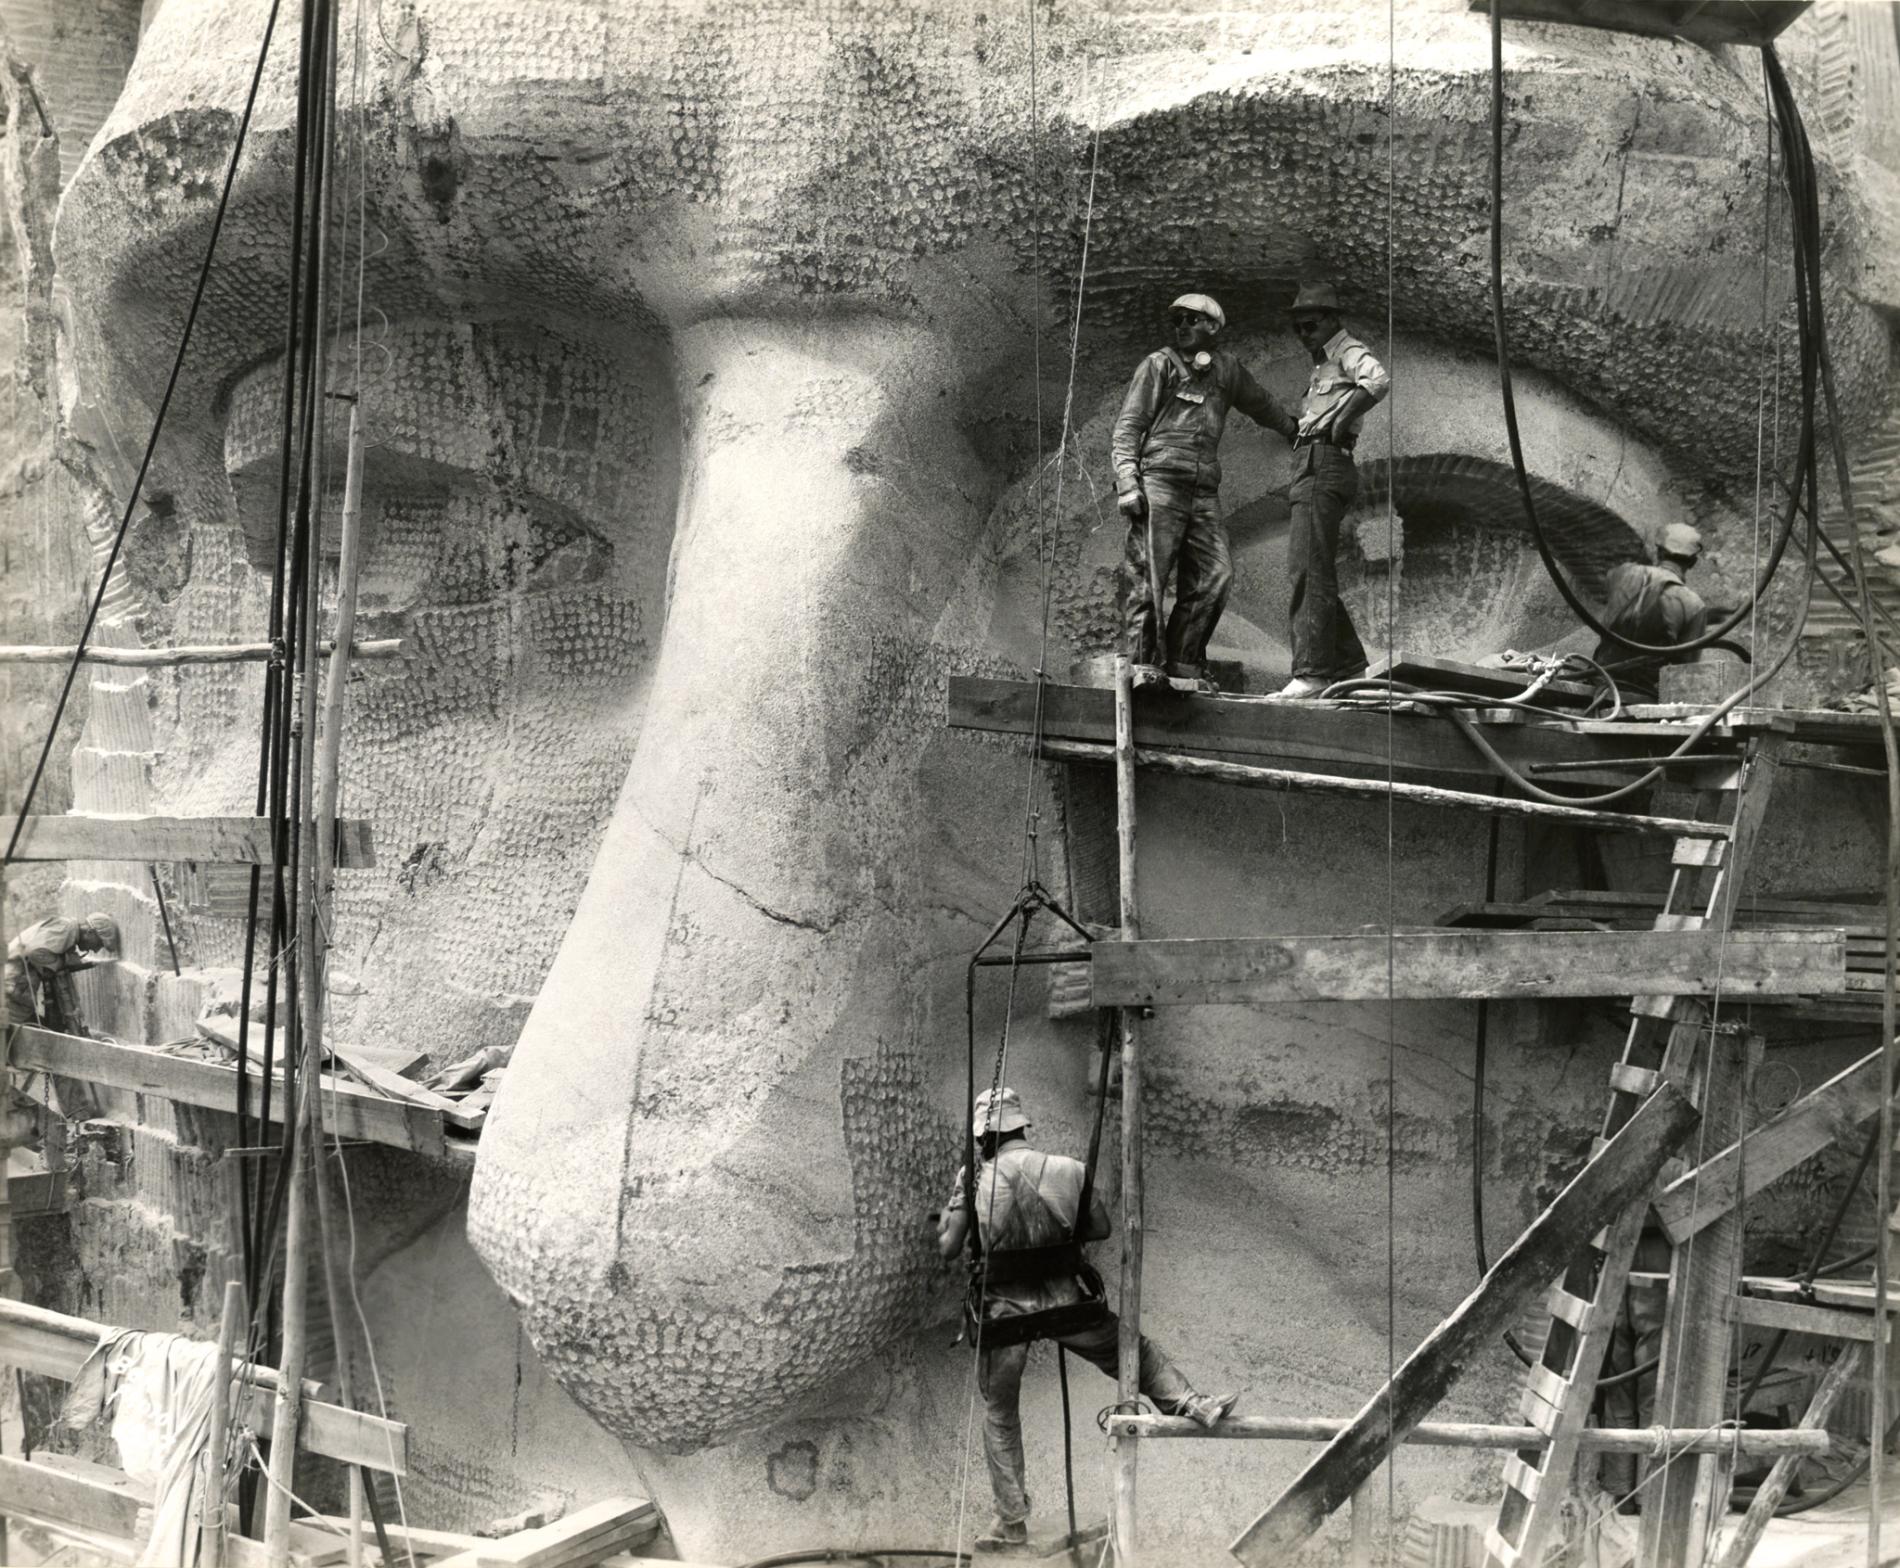 Mount Rushmore construction – 1930s